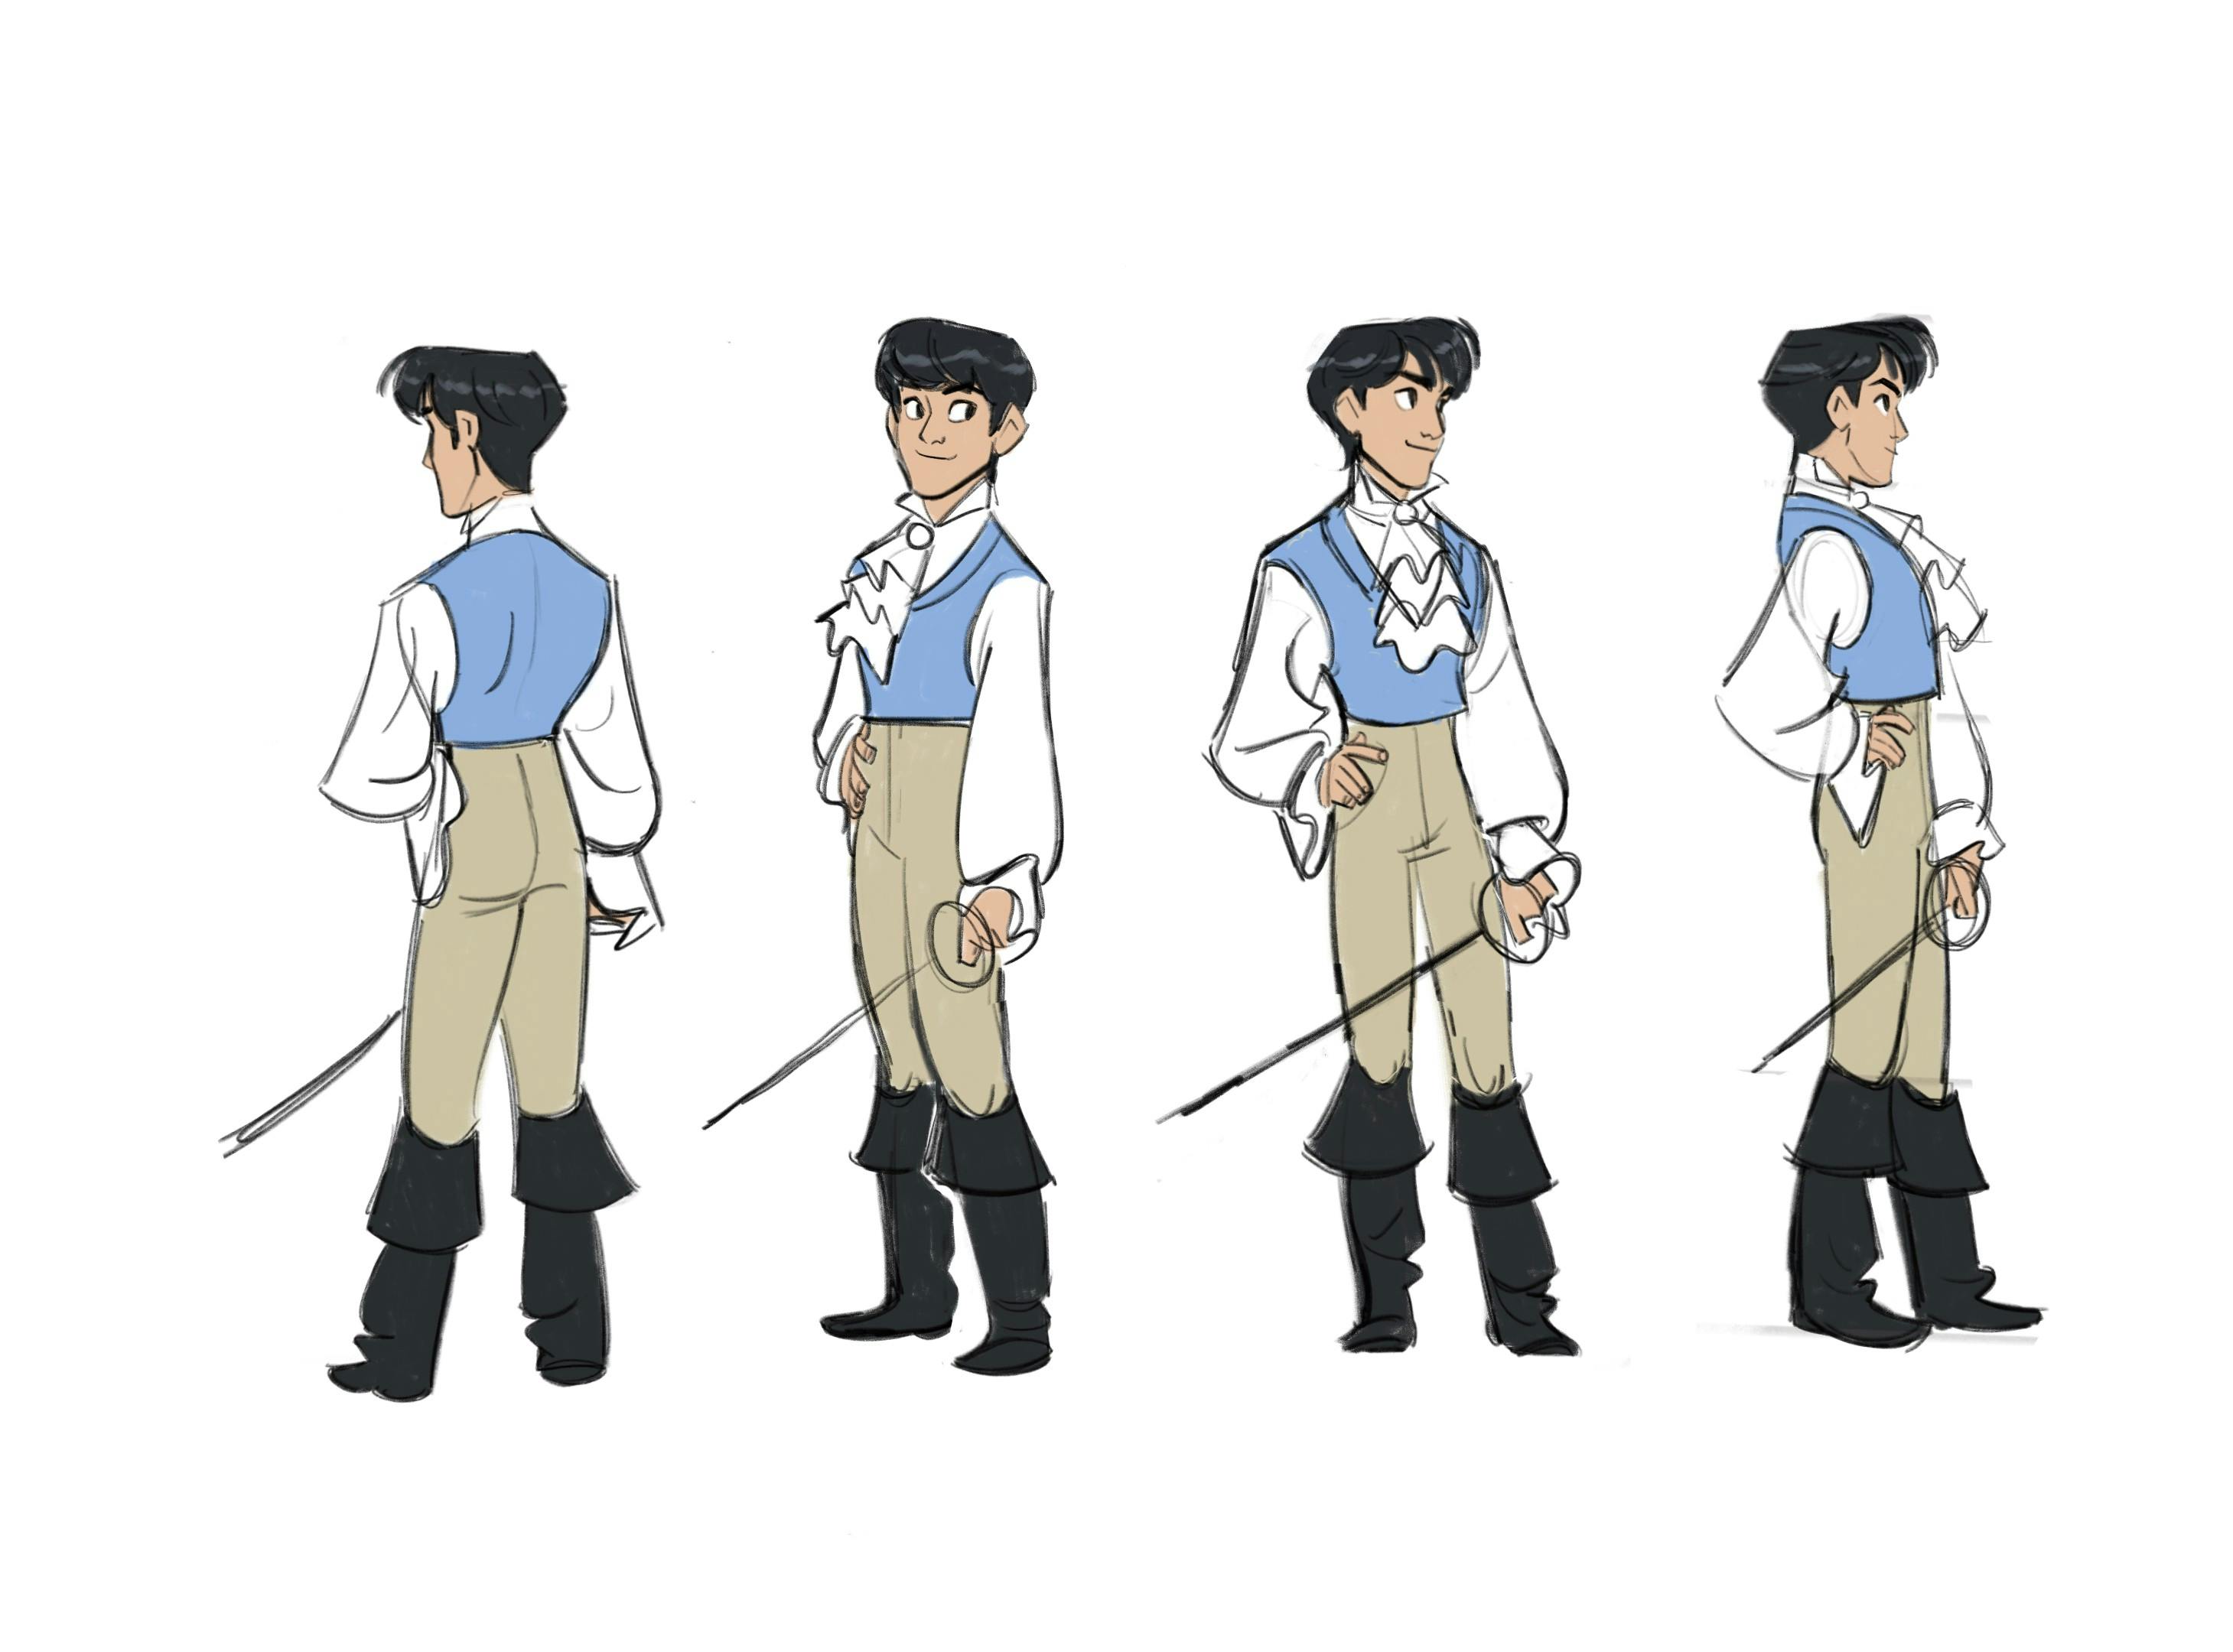 Concept art of a young man